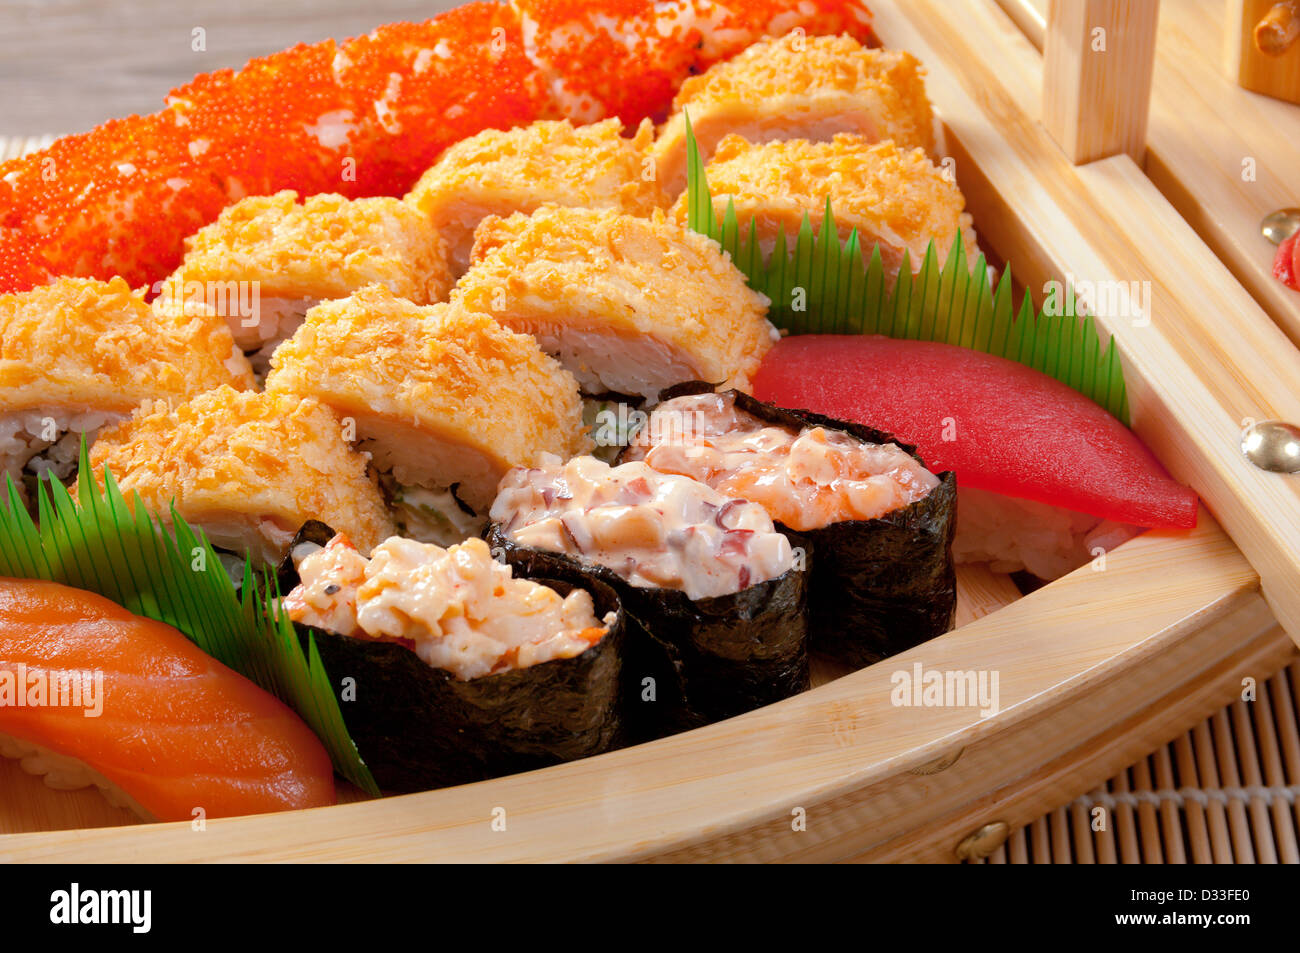 Japanese sushi traditional japanese food.Roll made of Smoked fish Stock Photo